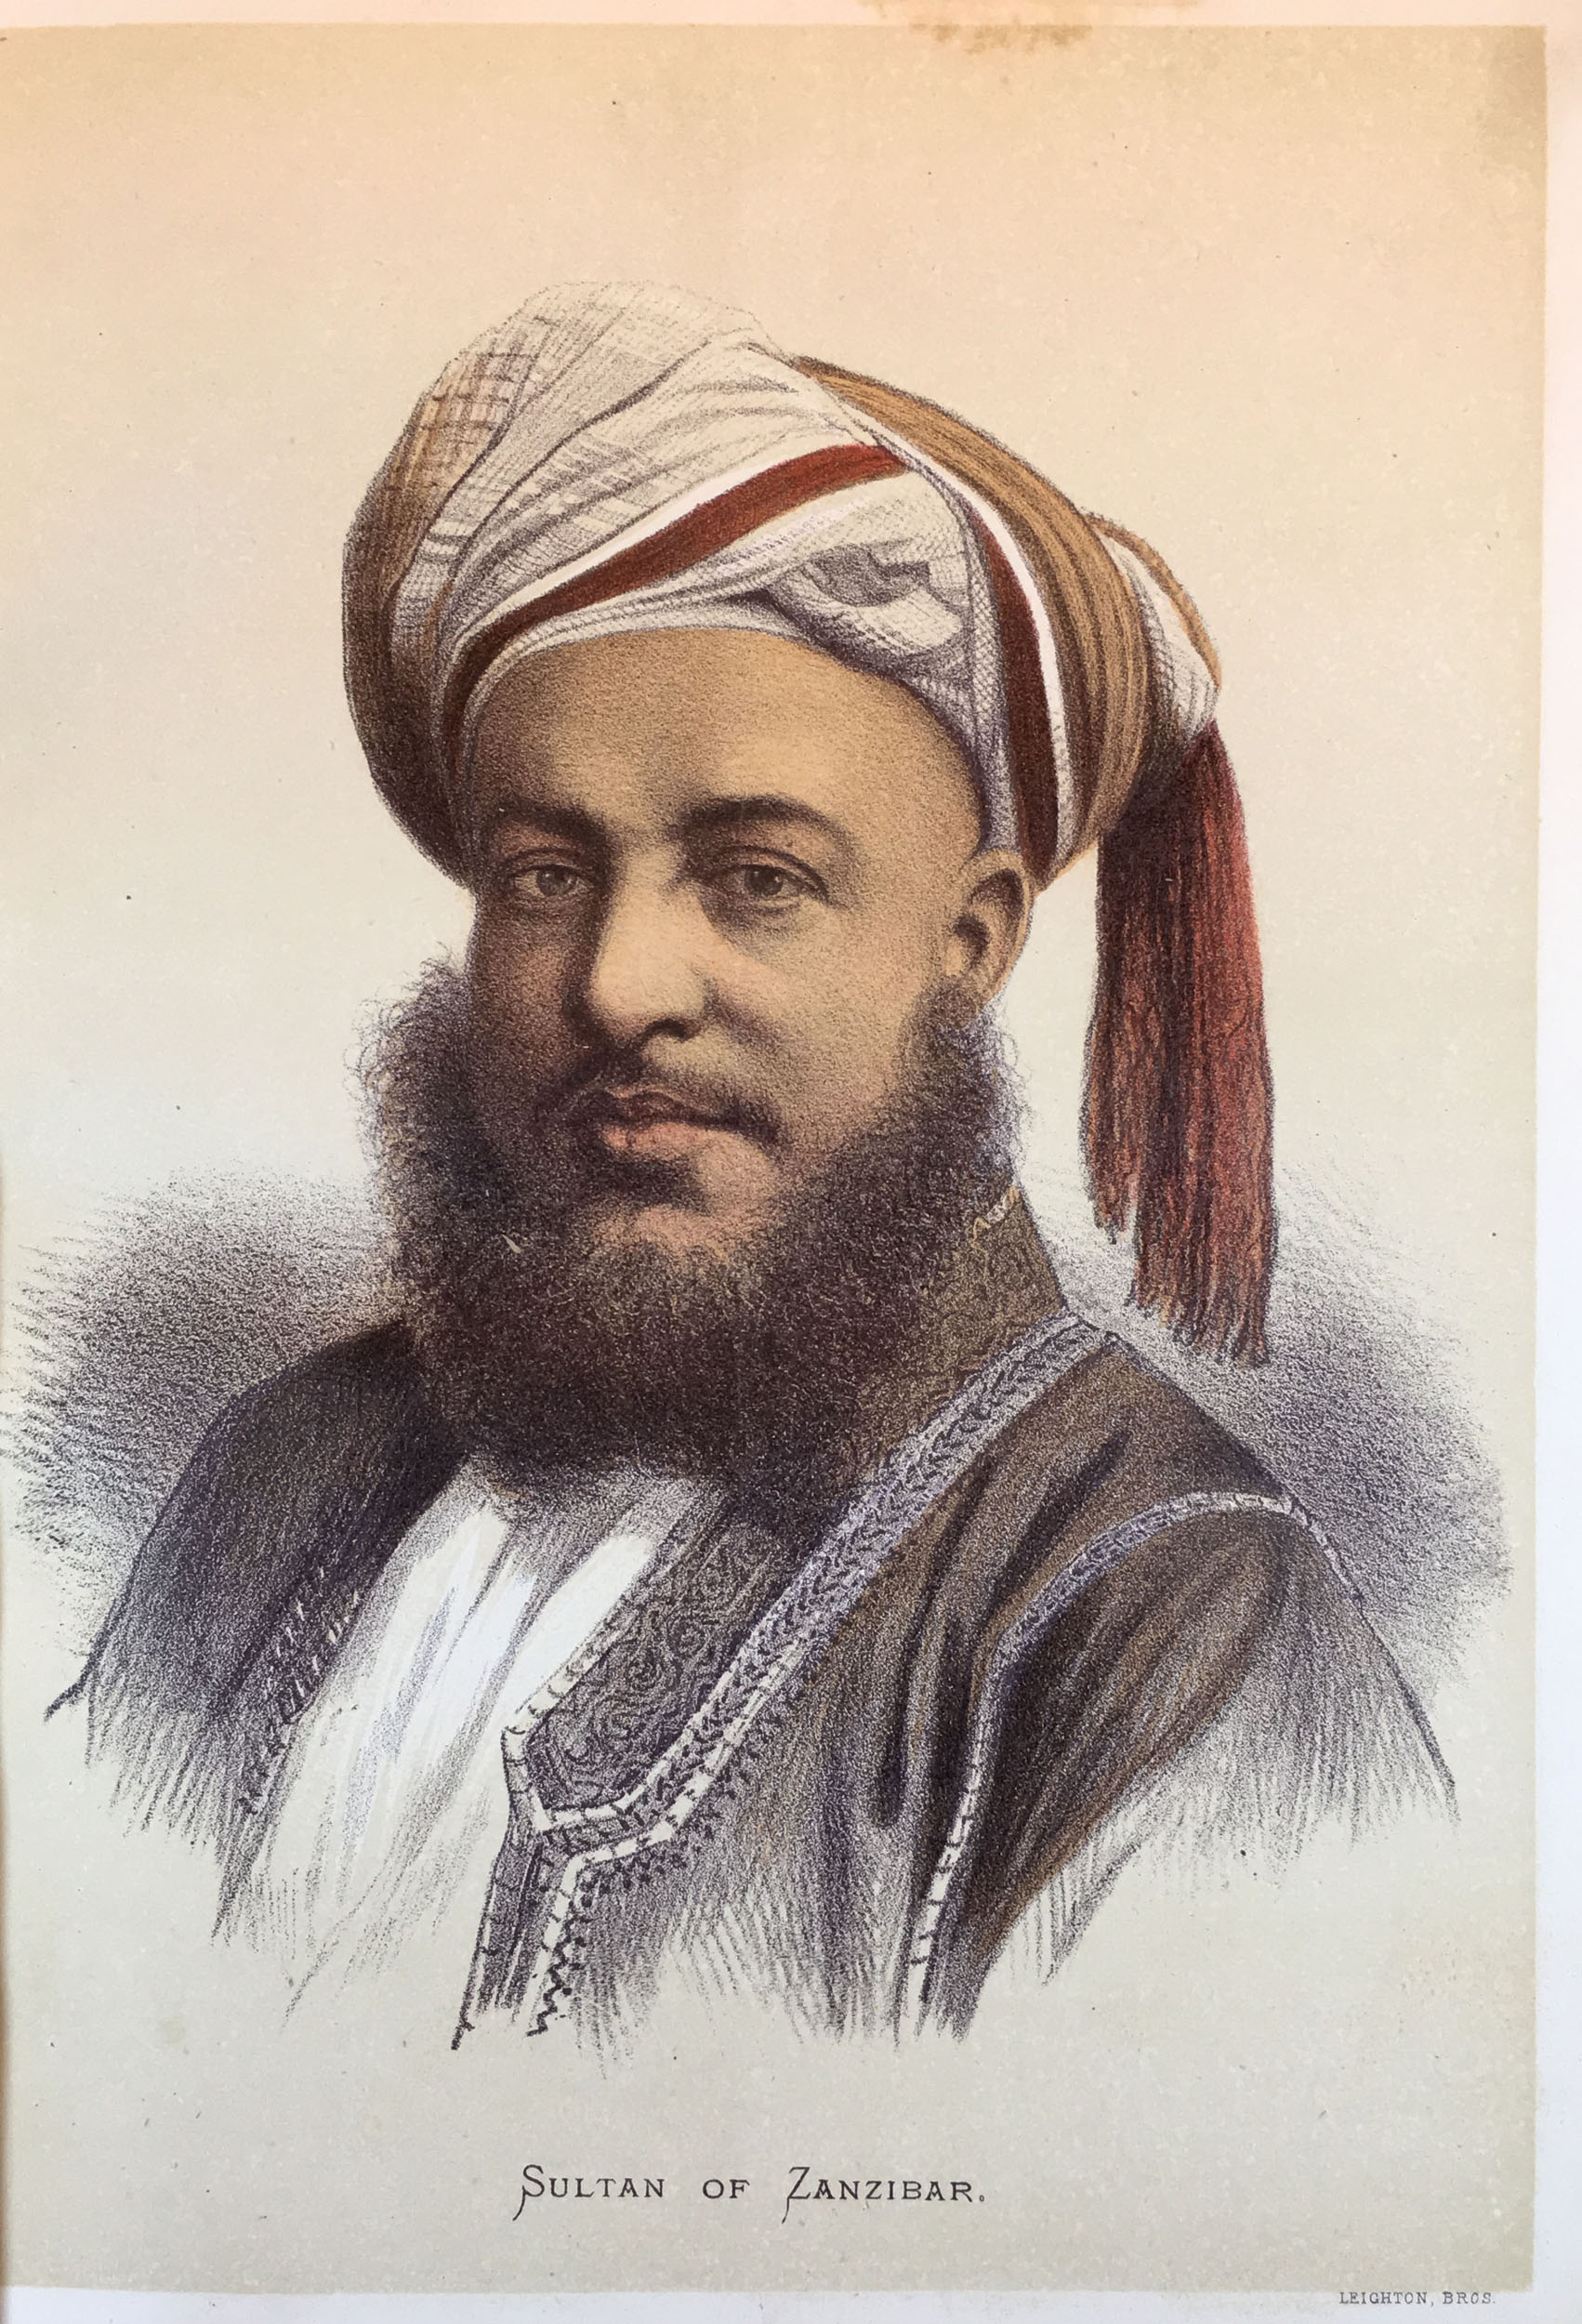 Sultan of Zanzibar [Barghash bin Said]. Illustration from James E. Ritchie, The Pictorial Edition of the Life and Discoveries of David Livingstone, 2 vols (London and Edinburgh: A. Fullarton & Co., 1876-1879), 2:np. Copyright Adrian S. Wisnicki. Creative Commons Attribution-NonCommercial 3.0 Unported (https://creativecommons.org/licenses/by-nc/3.0/).